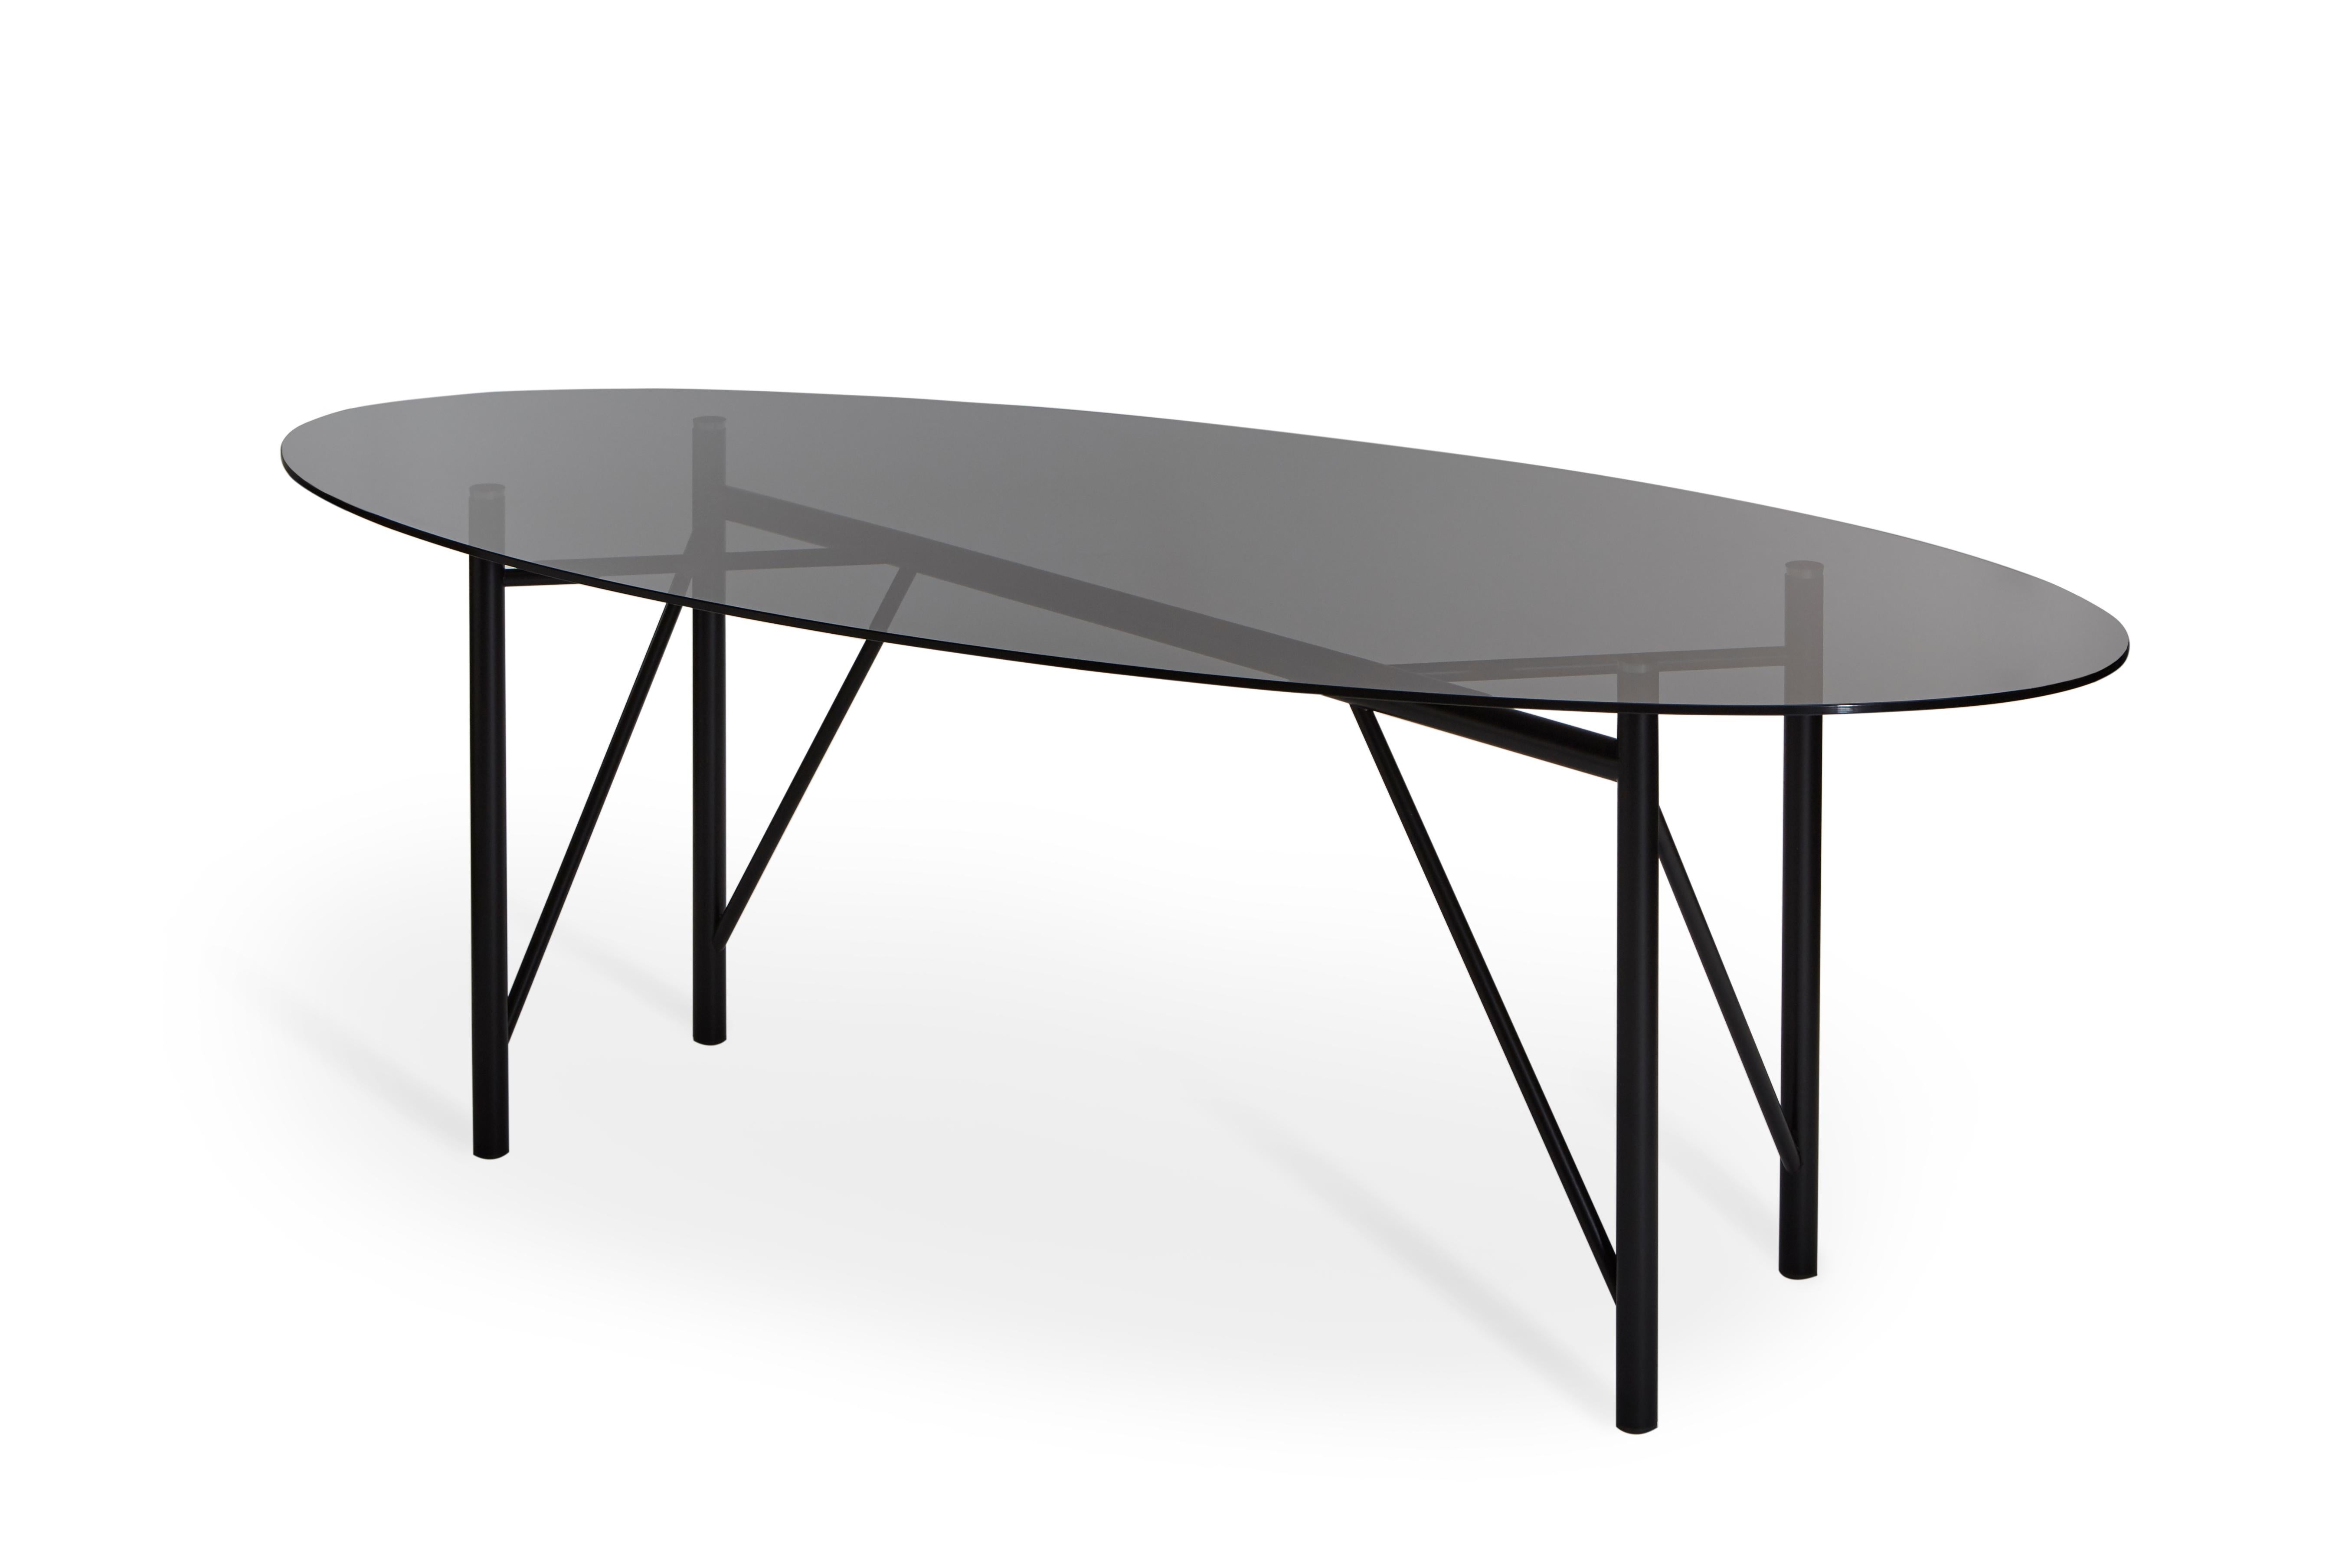 Nero tubolar table oval by Mentemano
Dimensions: W220 x D 100 x H 75 cm
Materials: Black base, smoked grey top

The project is based on lightness and attention to details. Volumes and lines are the result of technical and aesthetic process